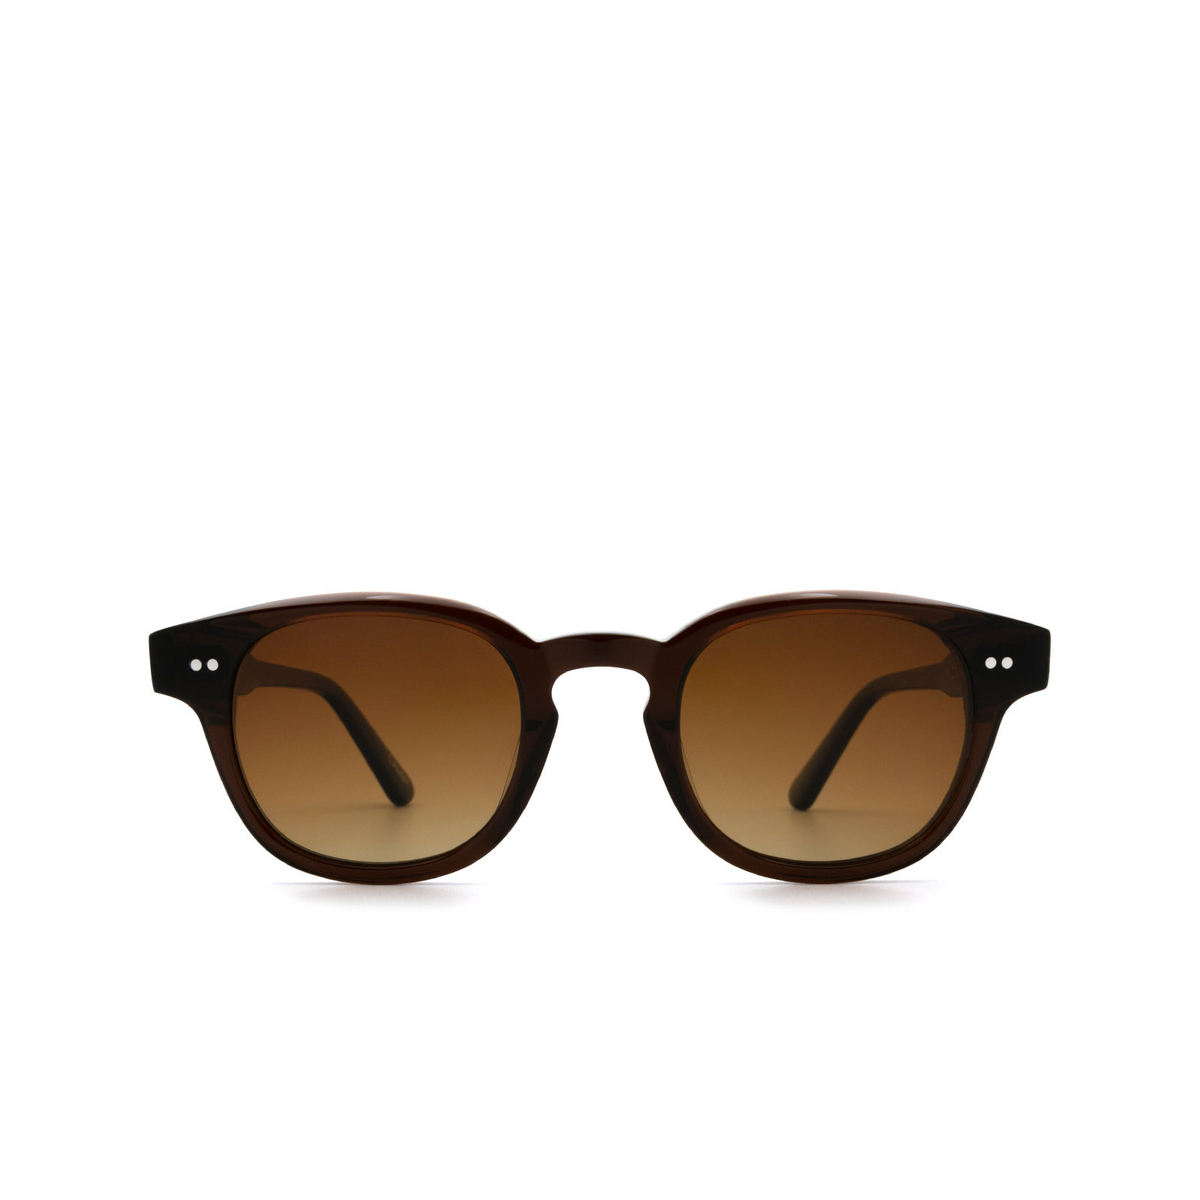 Chimi 01 Sunglasses BROWN - front view